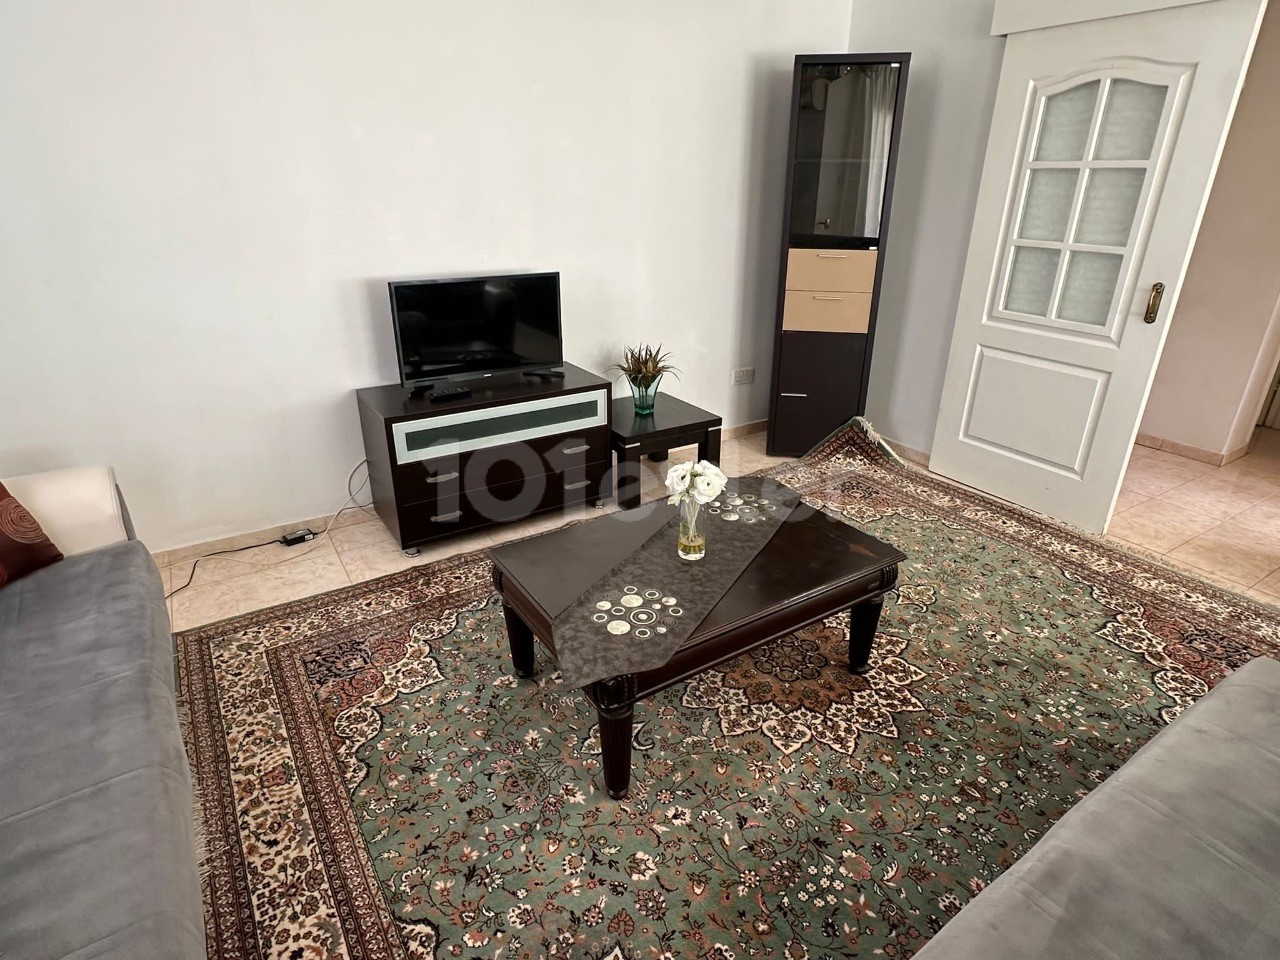 3+1 FLAT FOR RENT IN GIRNE PATARA SITE